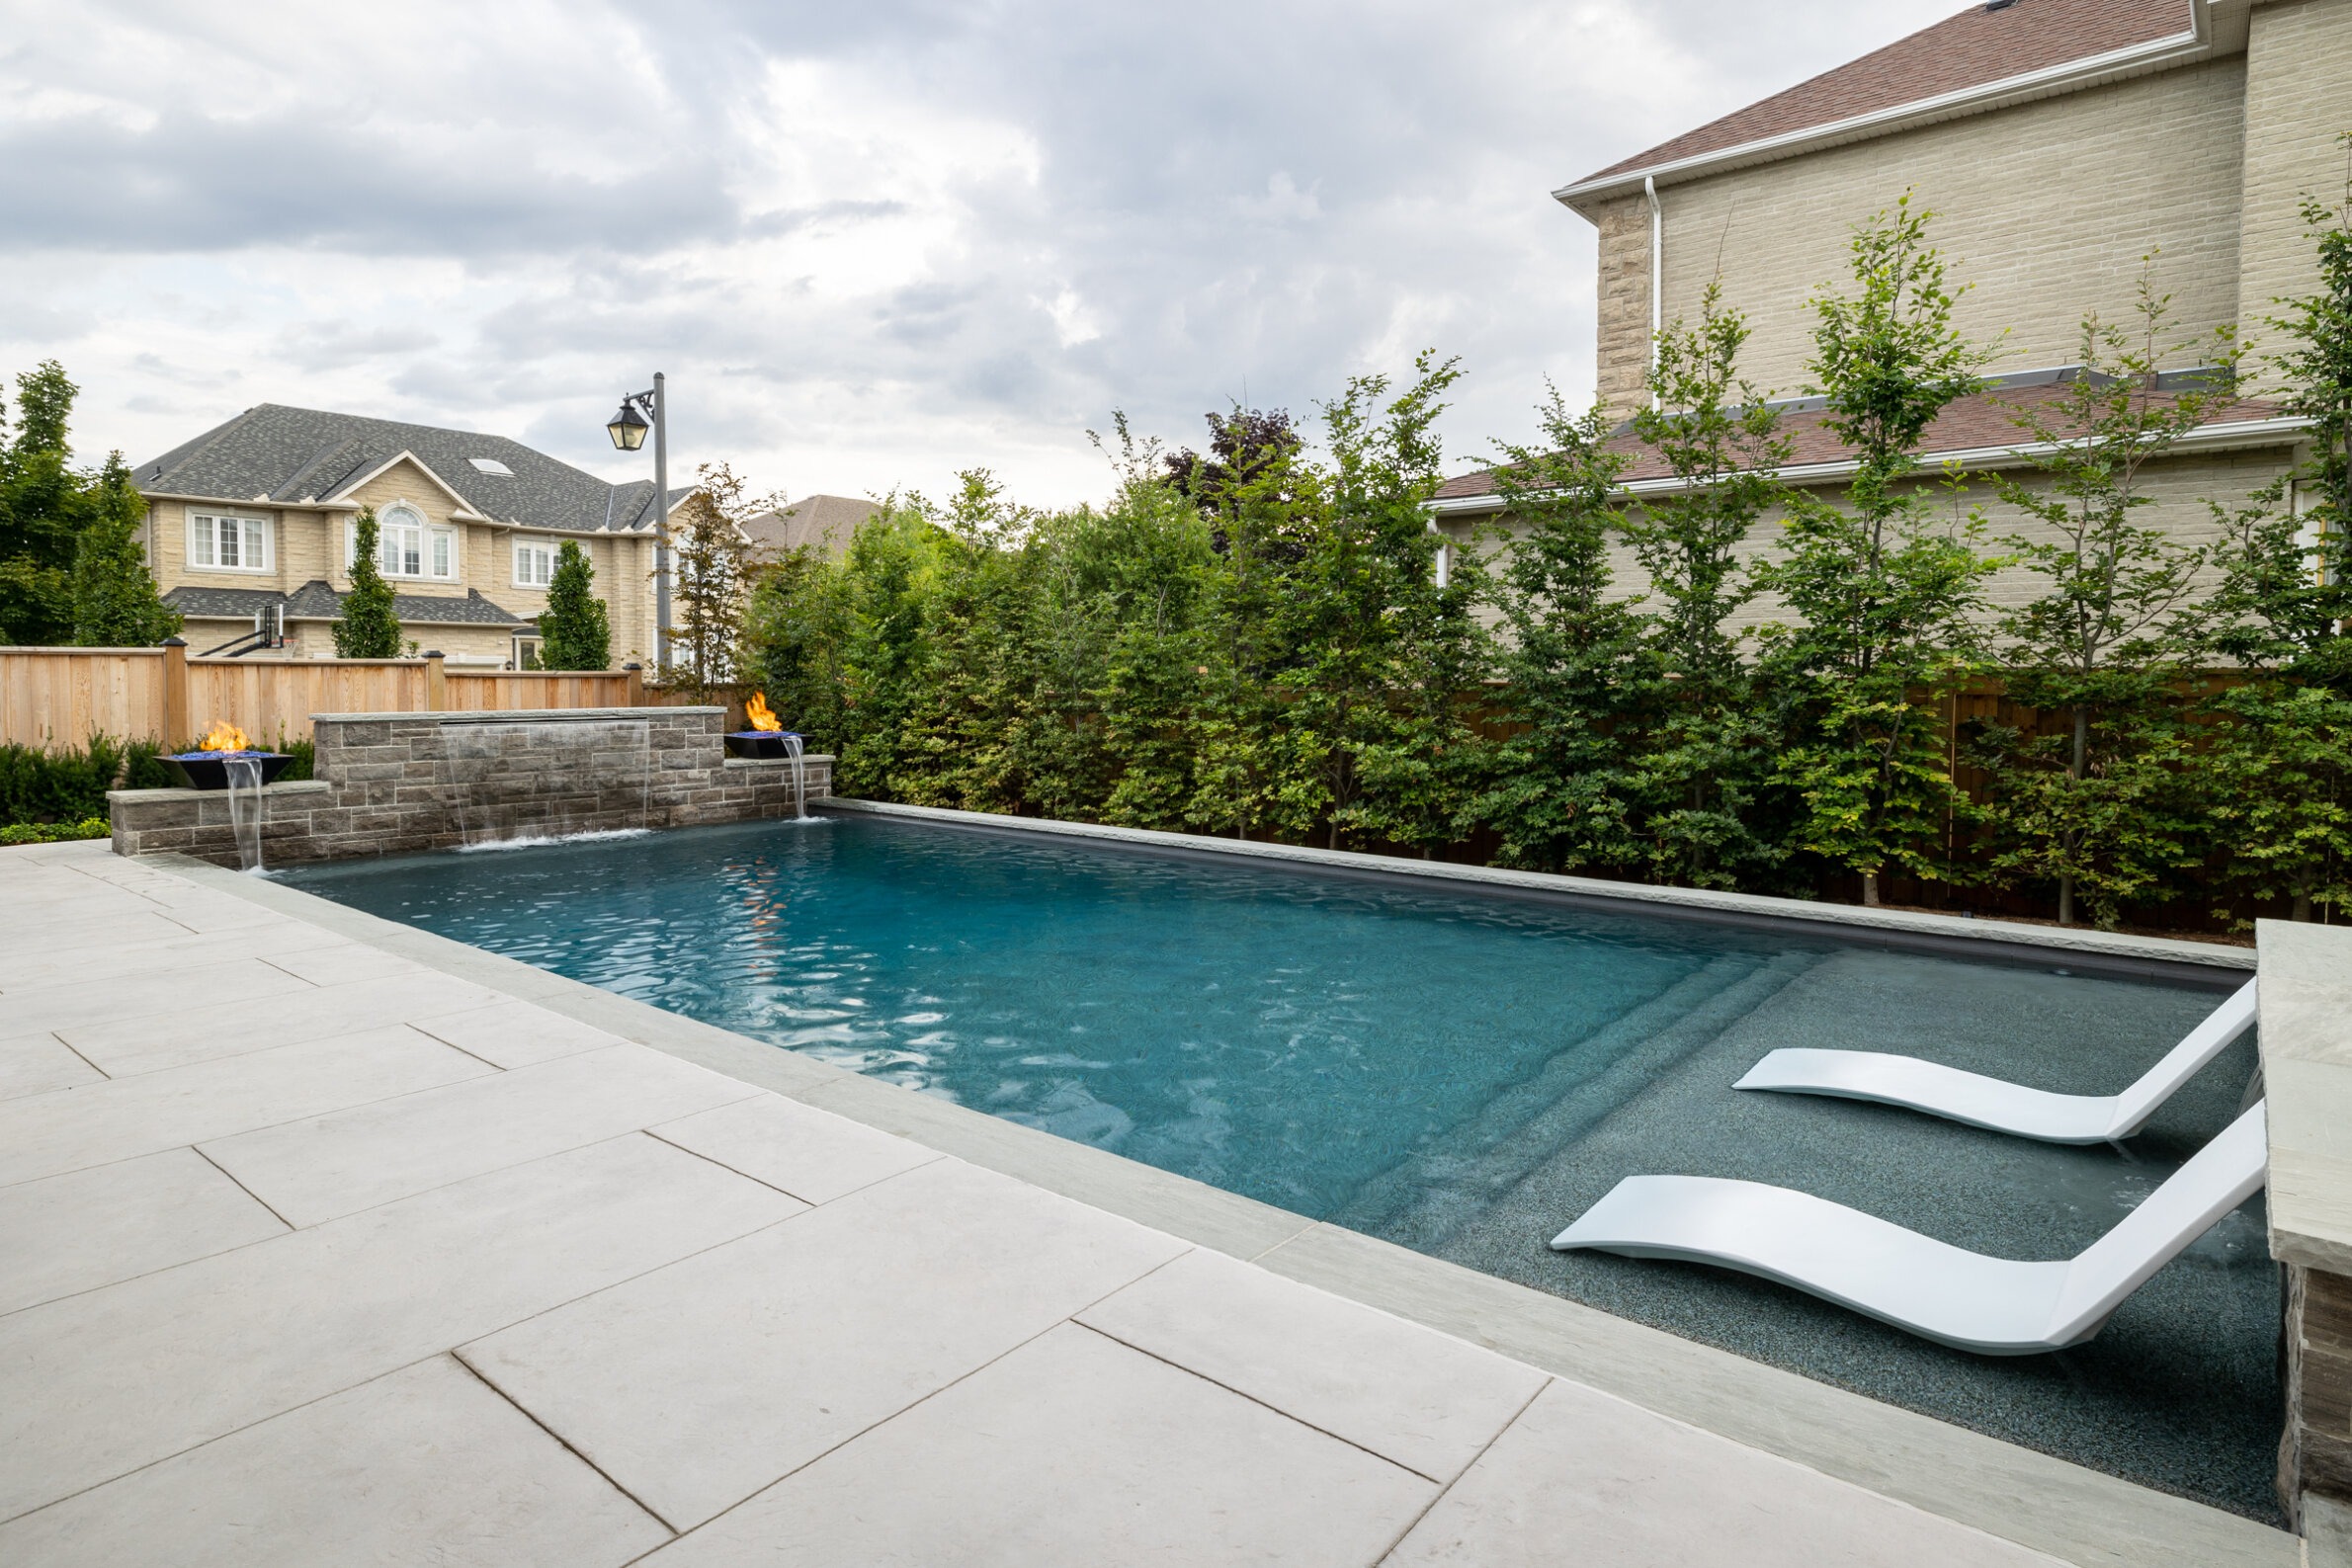 Residential backyard with a rectangular swimming pool, two modern white loungers, stone wall with fire features, and a lush green fence line.